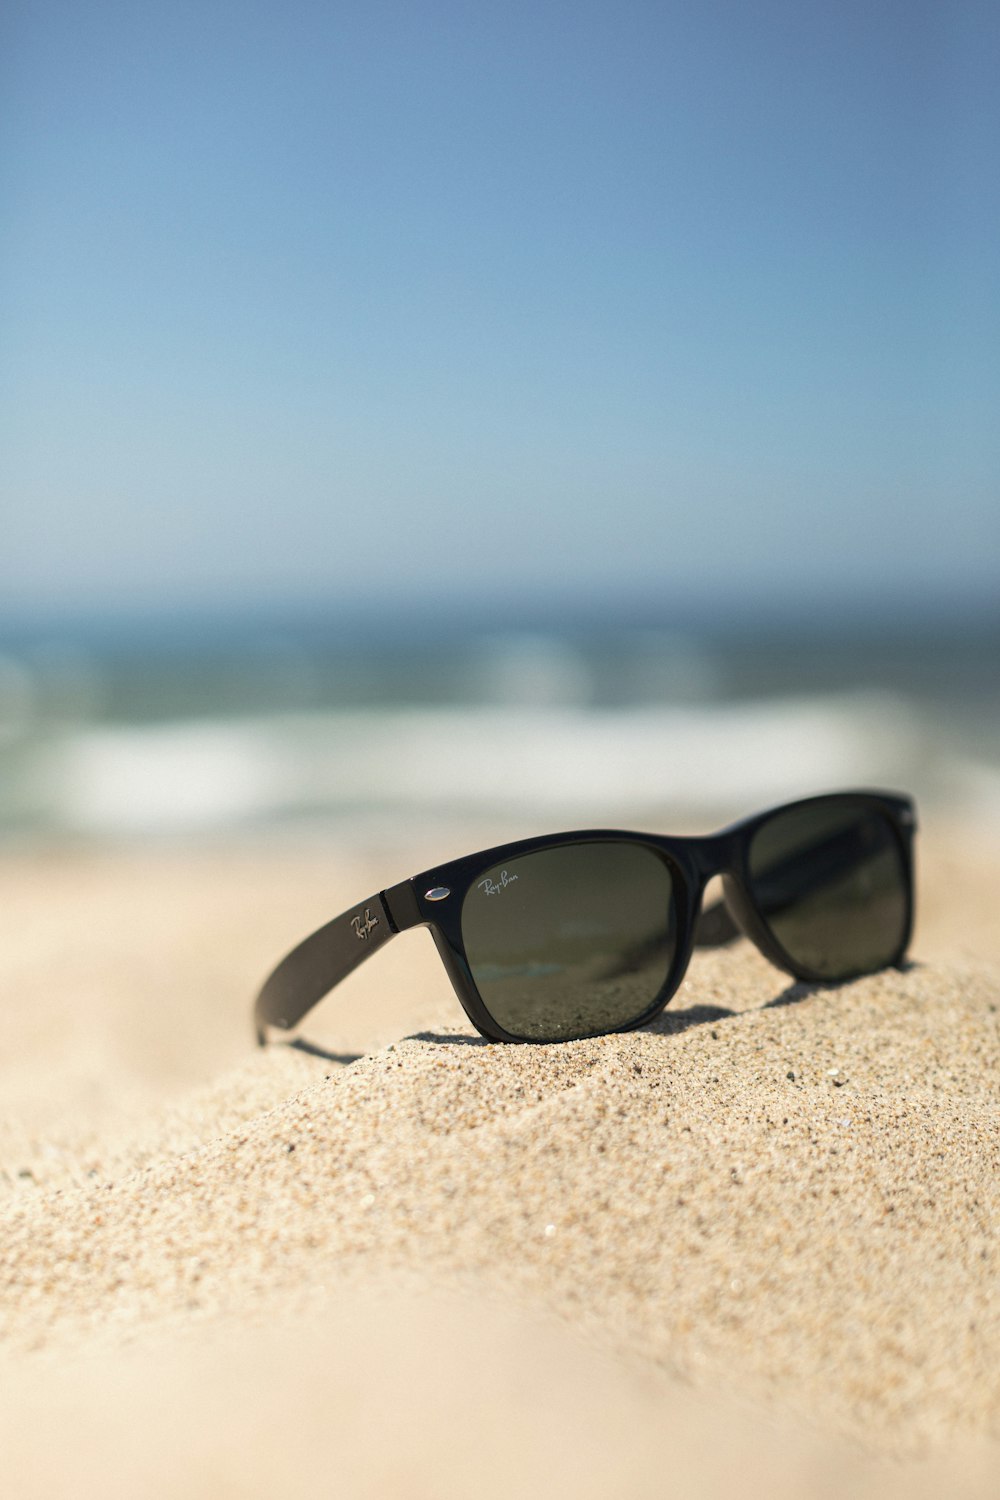 Beach Sunglasses Pictures | Download Free Images on Unsplash